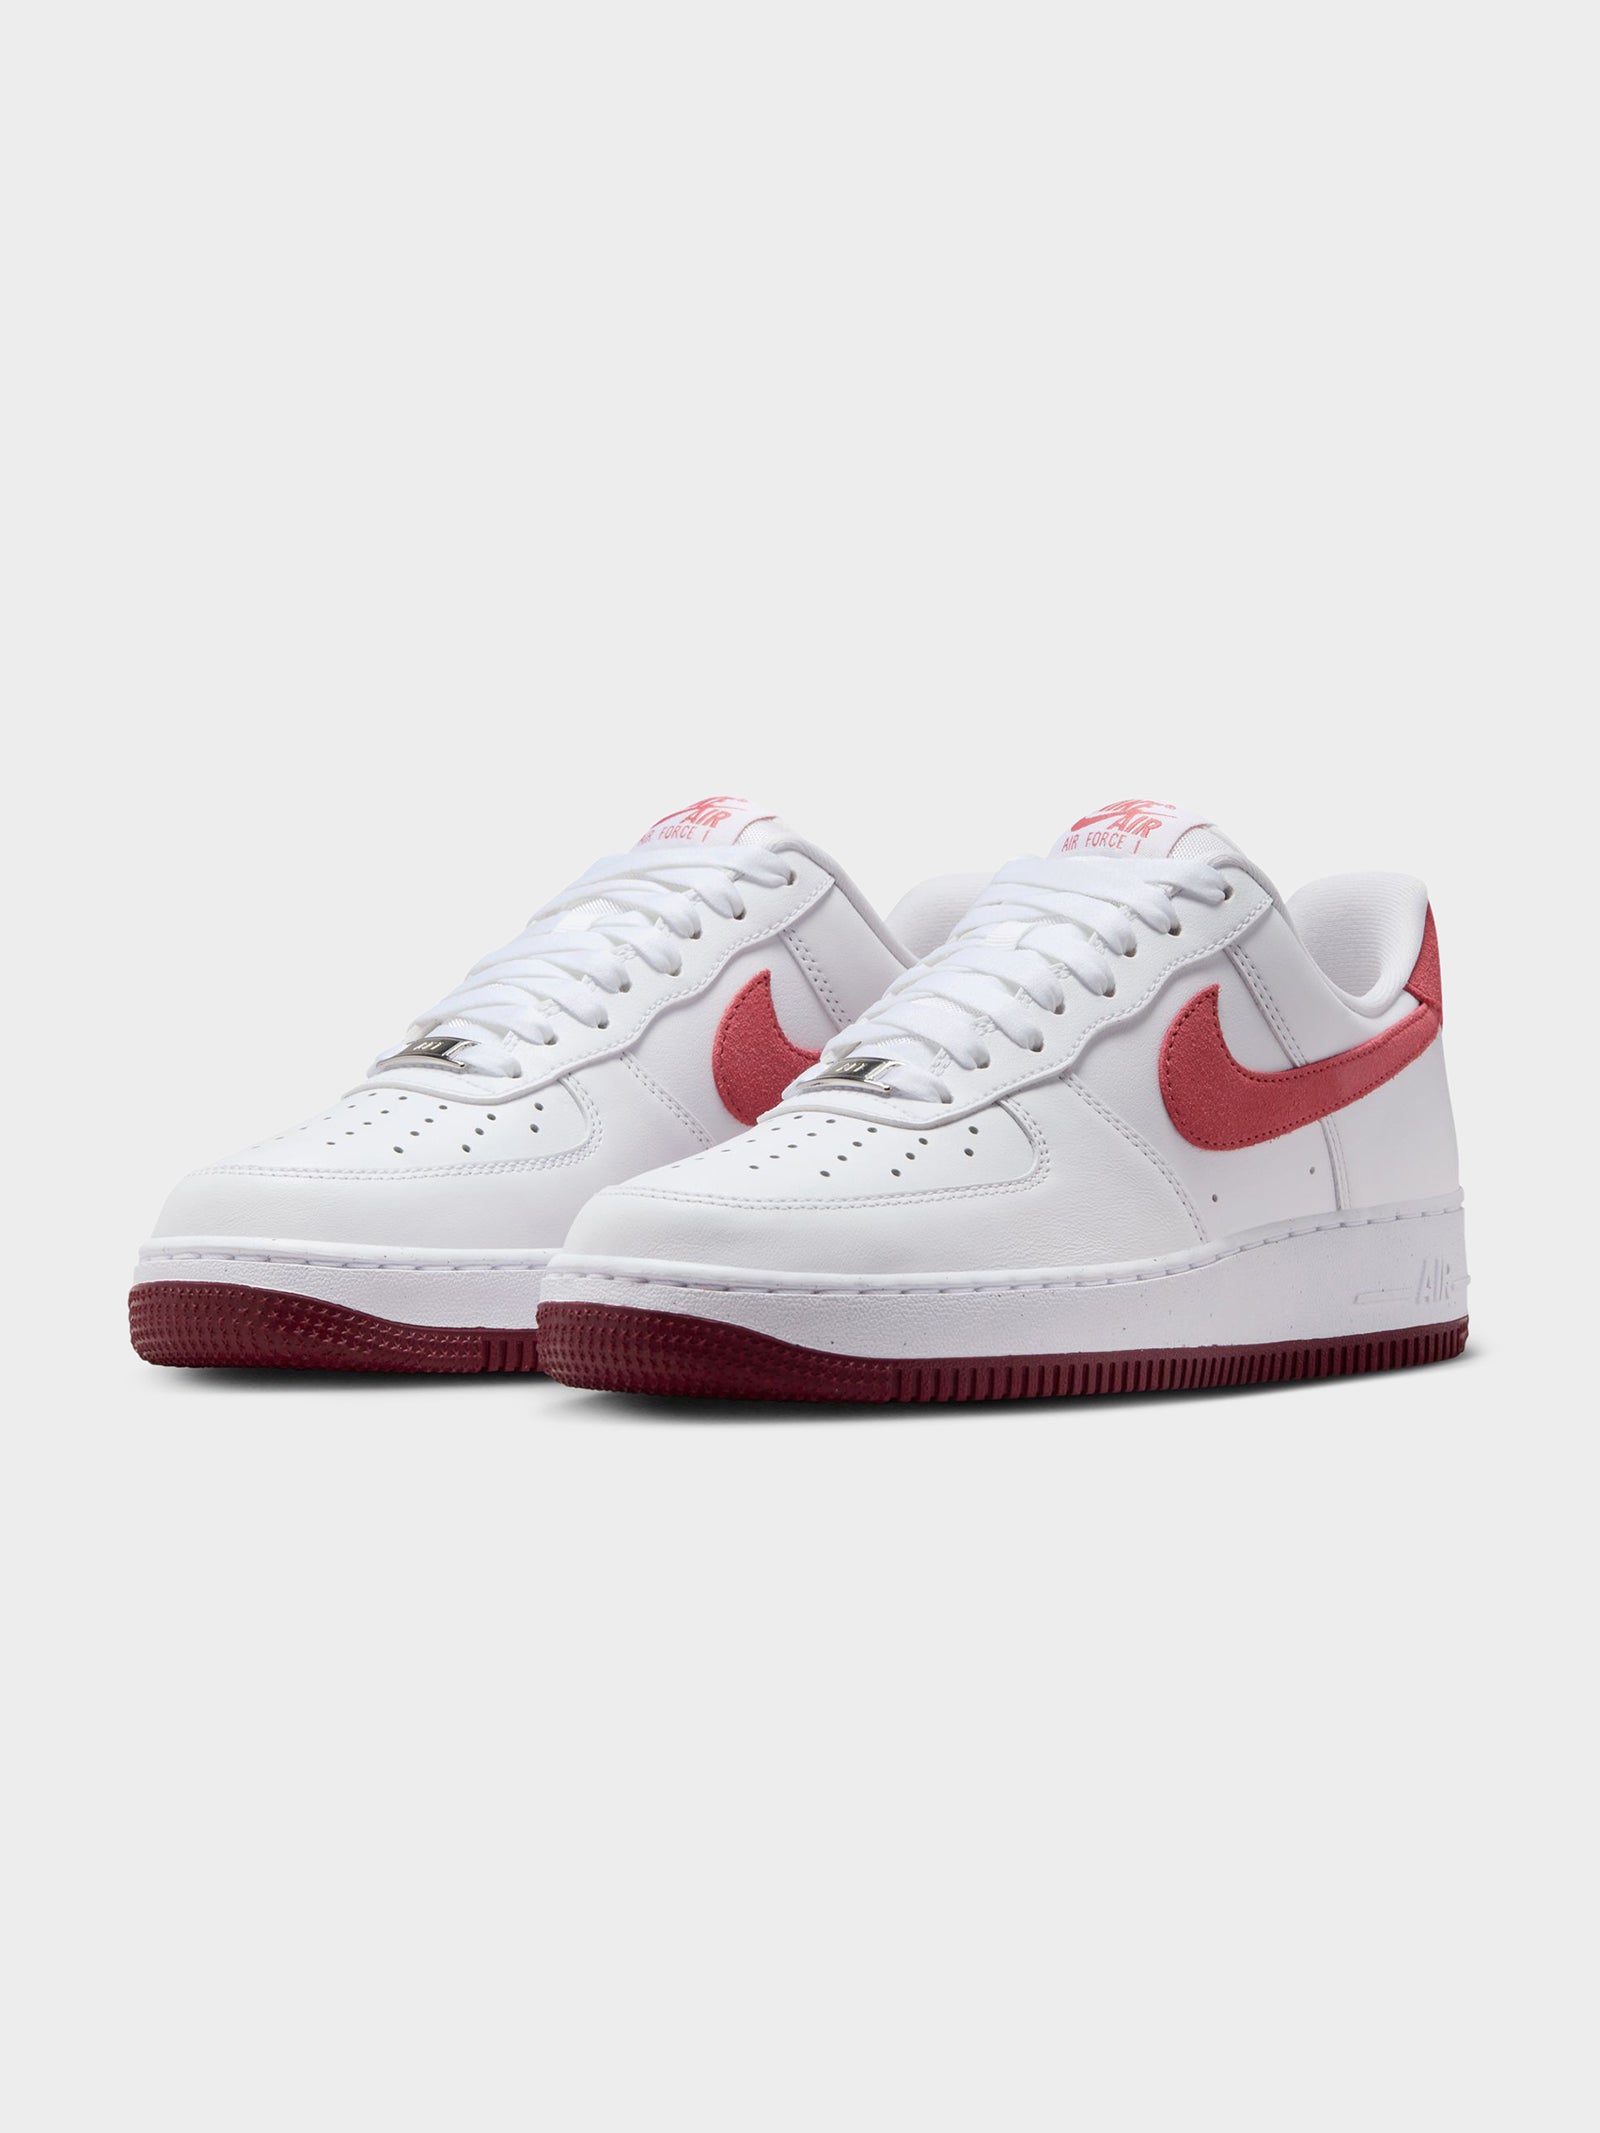 Womens Air Force 1 '07 Sneakers in White, Team Red & Dragon Red